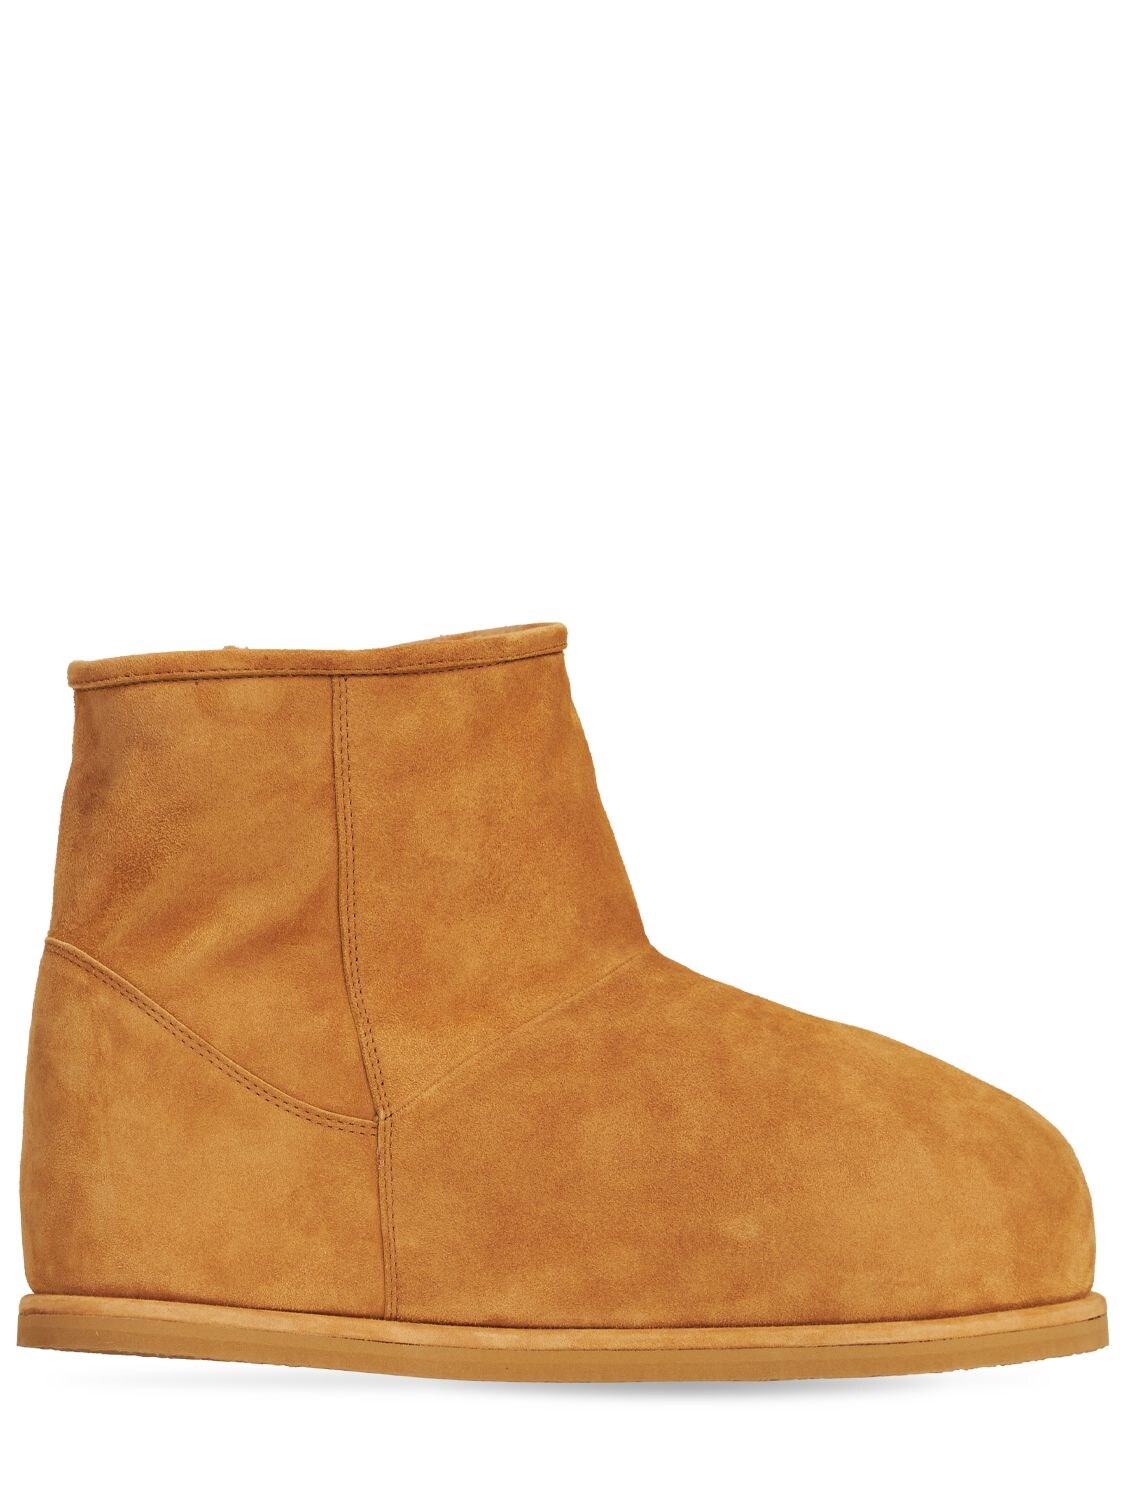 35mm Heidi Suede & Shearling Ankle Boots